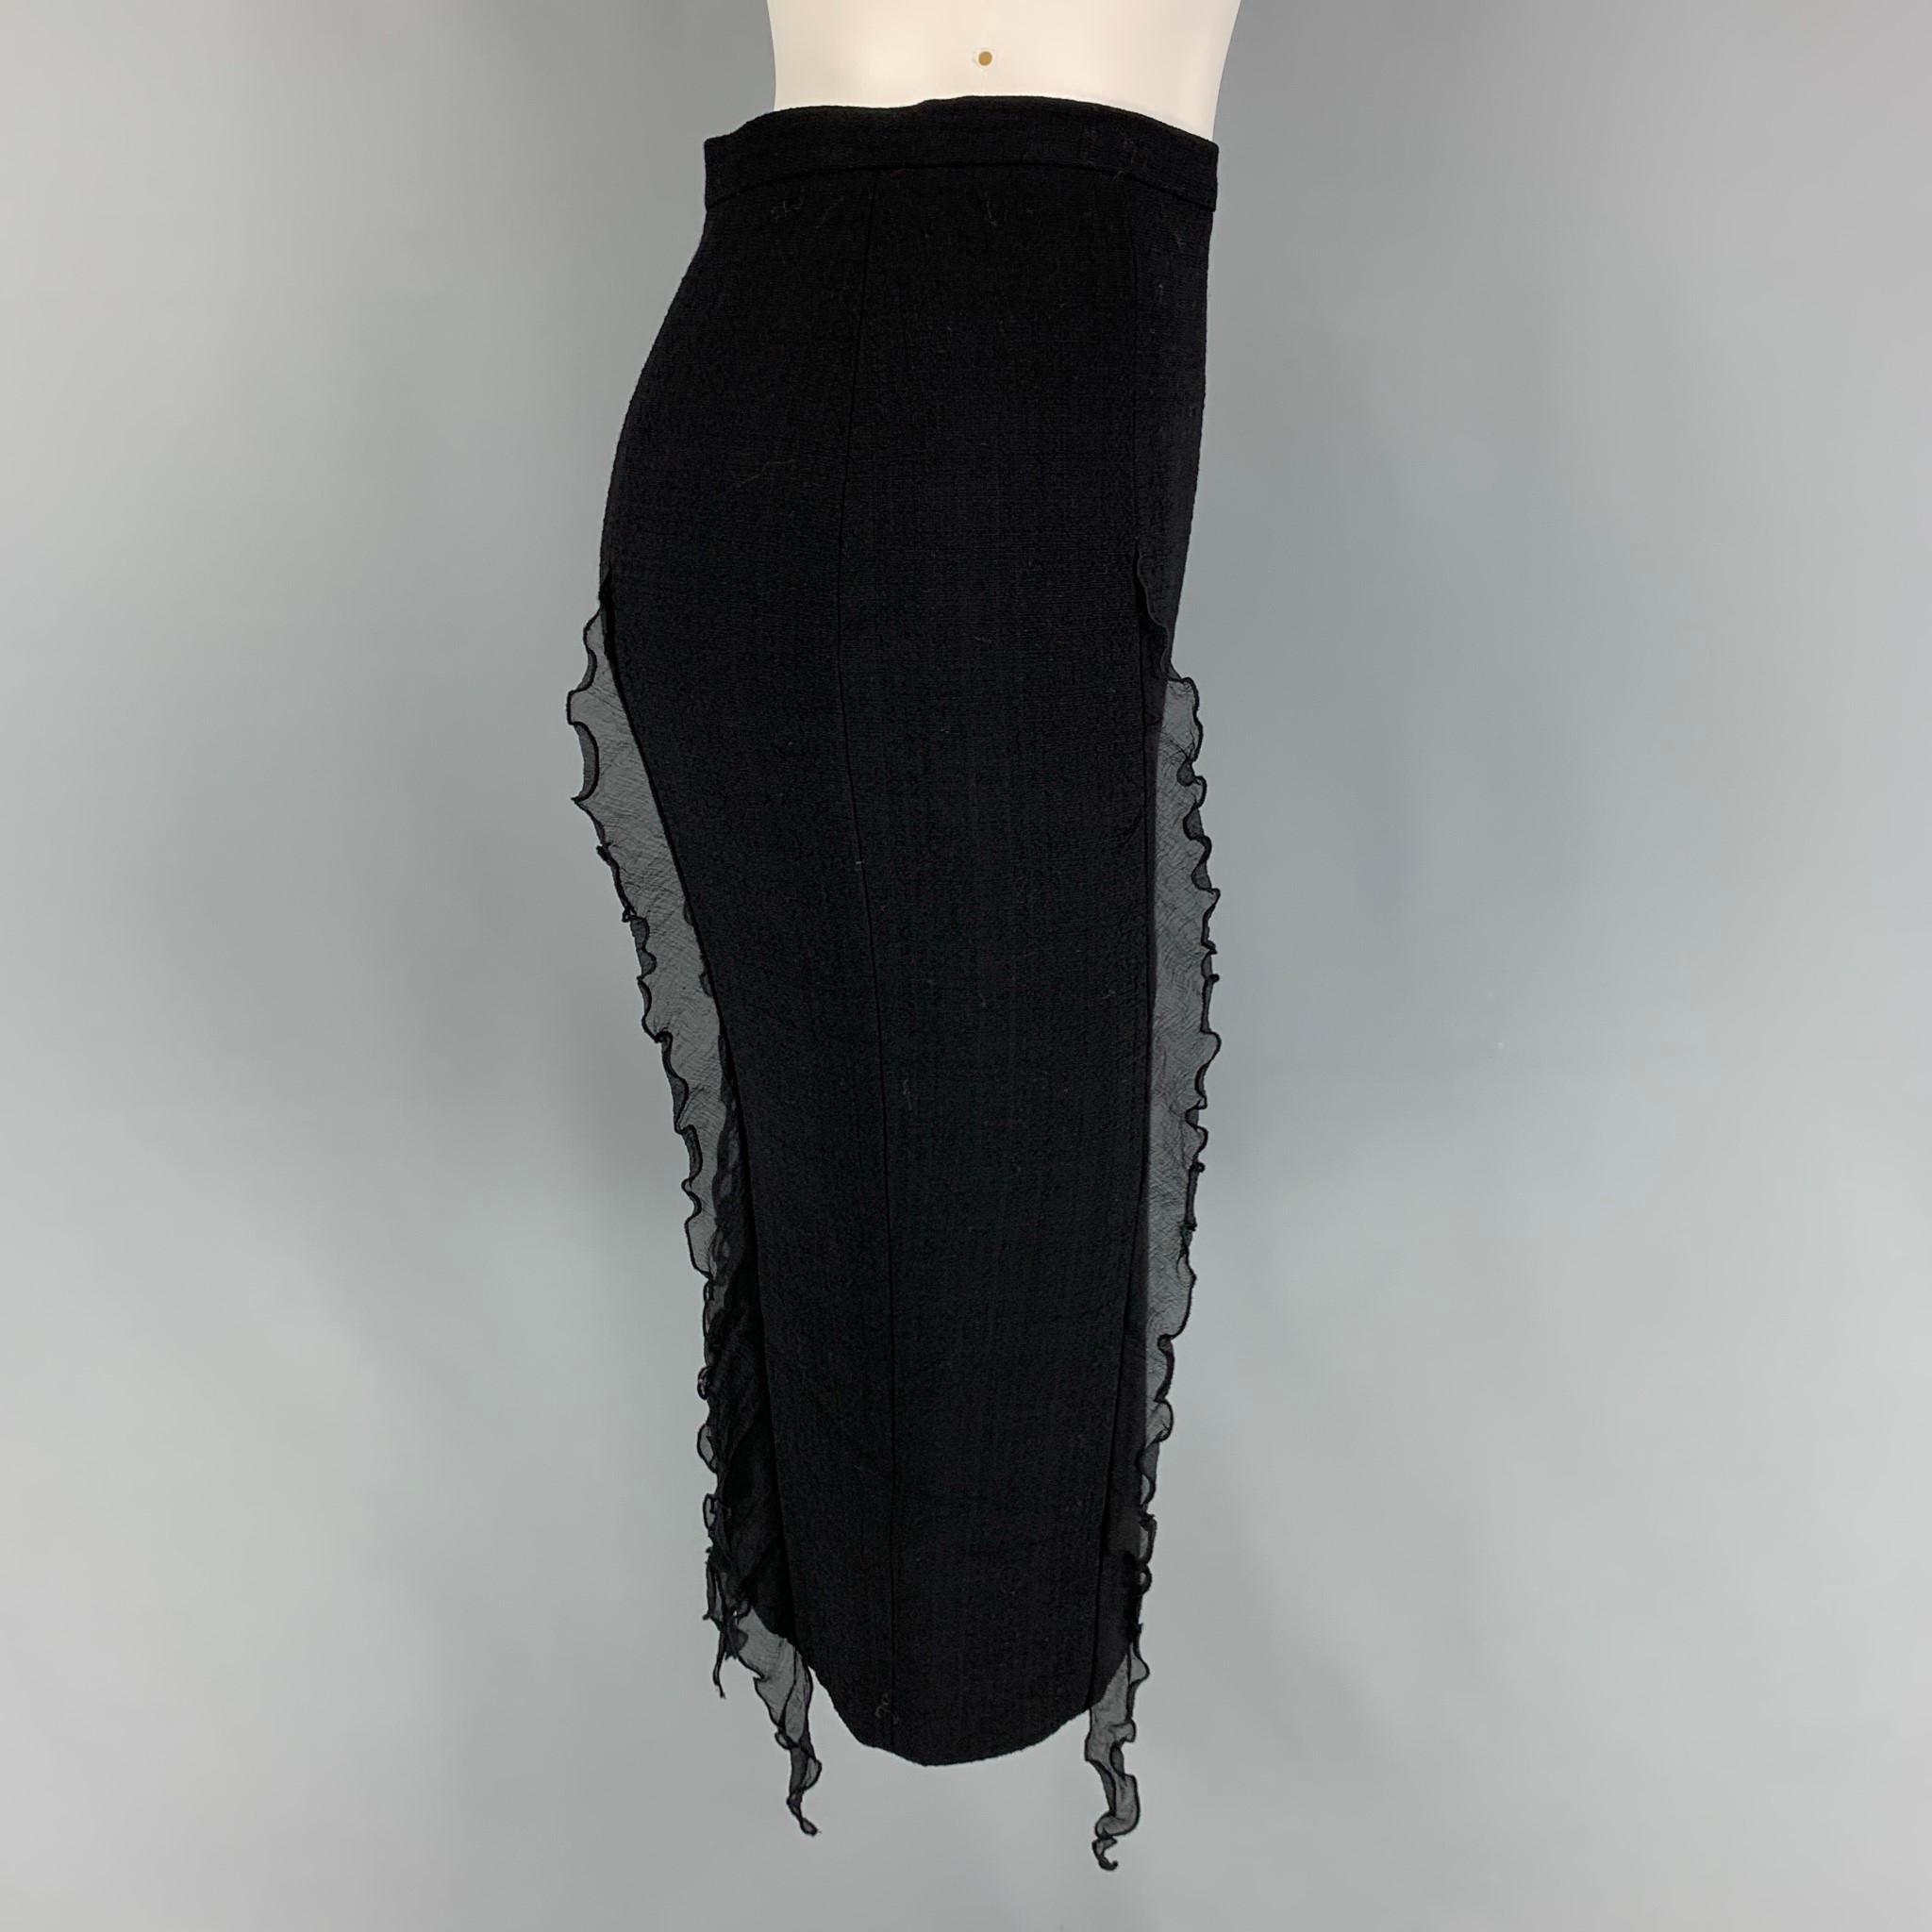 CHEAP and CHIC by MOSCHINO skirt comes in a black silk with a slip liner featuring a pencil style, ruffled trim, back slit, and a side zipper closure. 

Very Good Pre-Owned Condition.
Marked: I 36 / D 34 / F 34 / GB 6 / USA 4

Measurements:

Waist: